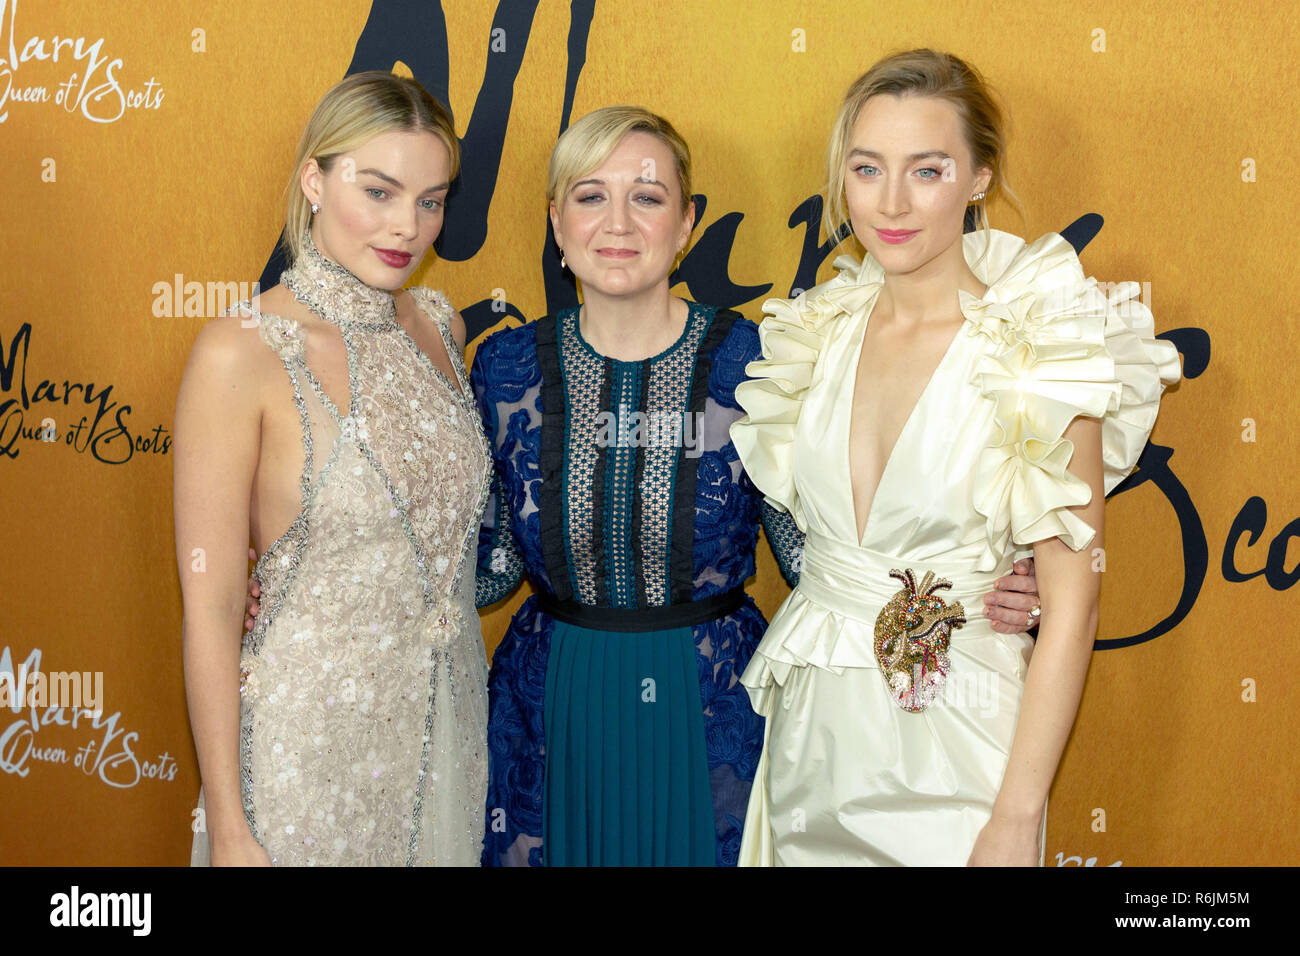 New York, USA. 4th Dec, 2018. (L-R) Margot Robbie, Josie Rourke, and Saoirse Ronan attend the New York premiere of 'Mary, Queen of Scots' at the Paris Theater in New York City on December 4, 2018. Credit: Jeremy Burke/Alamy Live News Stock Photo